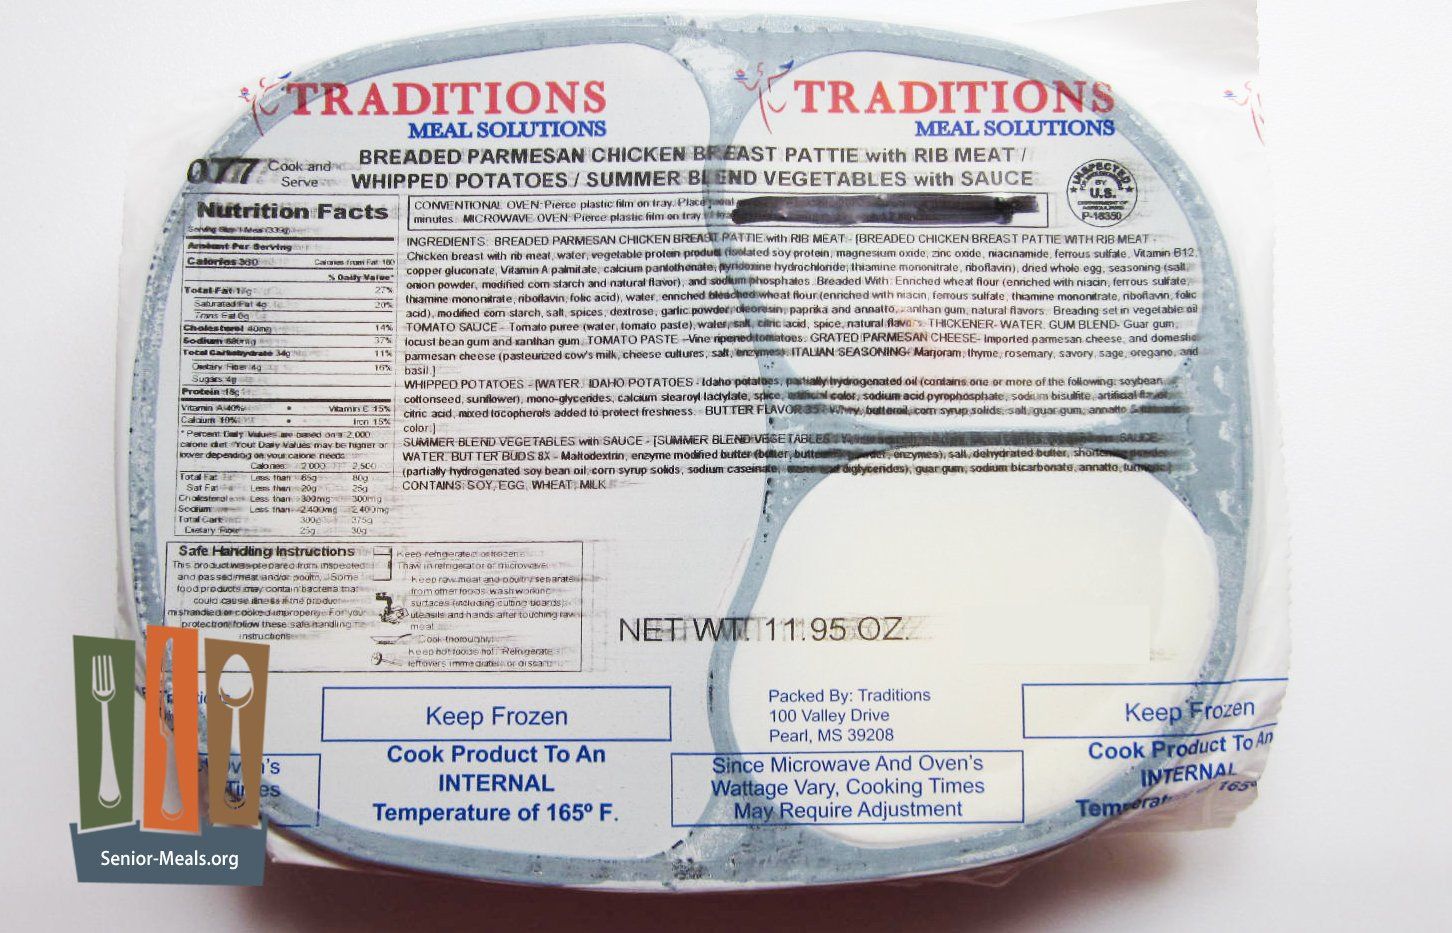 Tradition Meal Solutions Tray